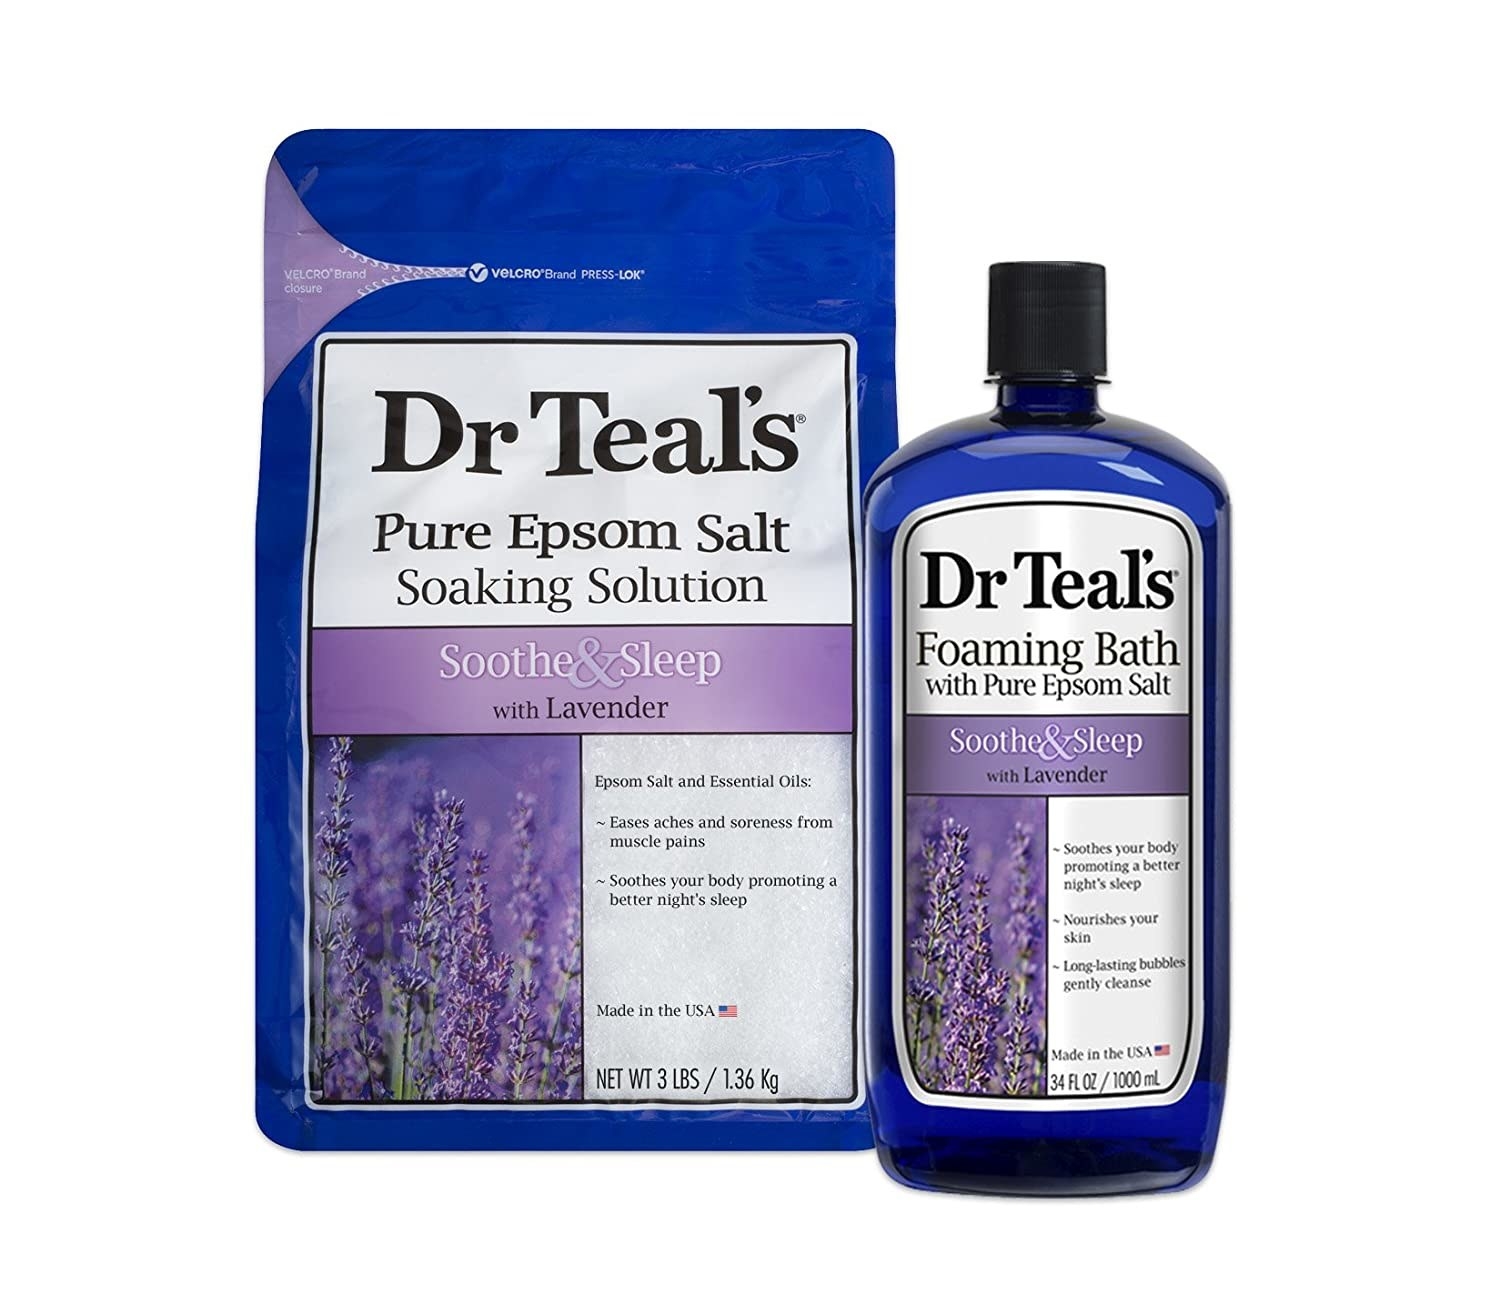 the bag and bottle of lavender soothe and sleep dr teals products